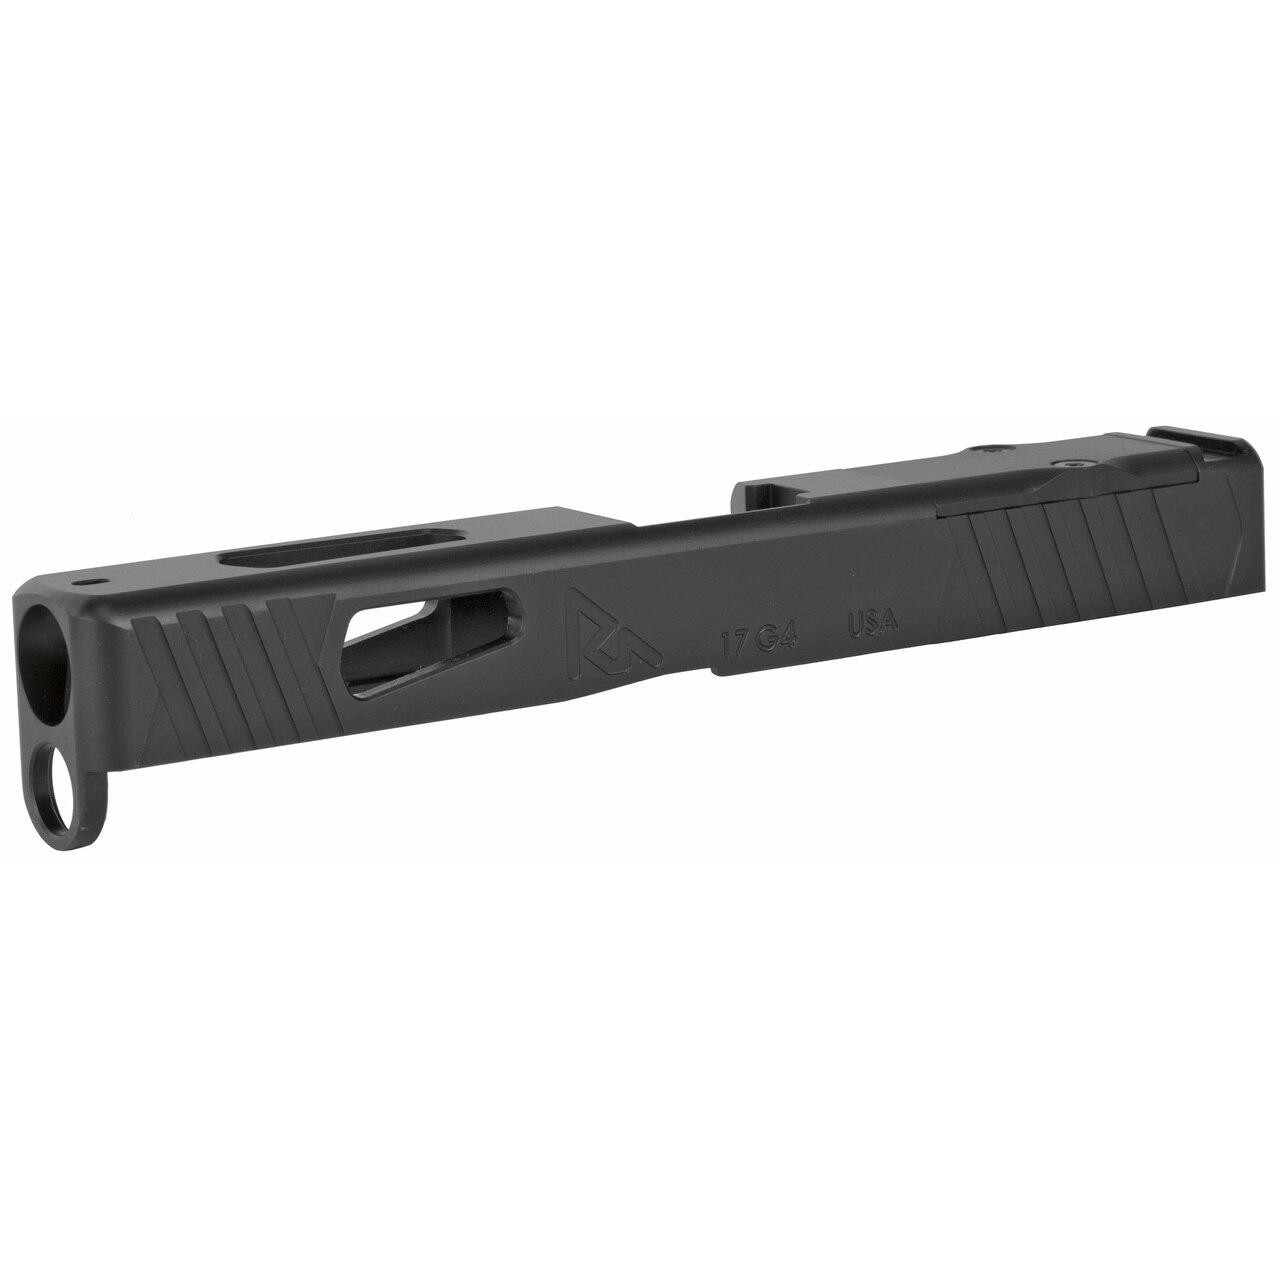 Rival Arms Ra Slide For Glk 17 Gen 4 A1 Rmr Blk 788130026458